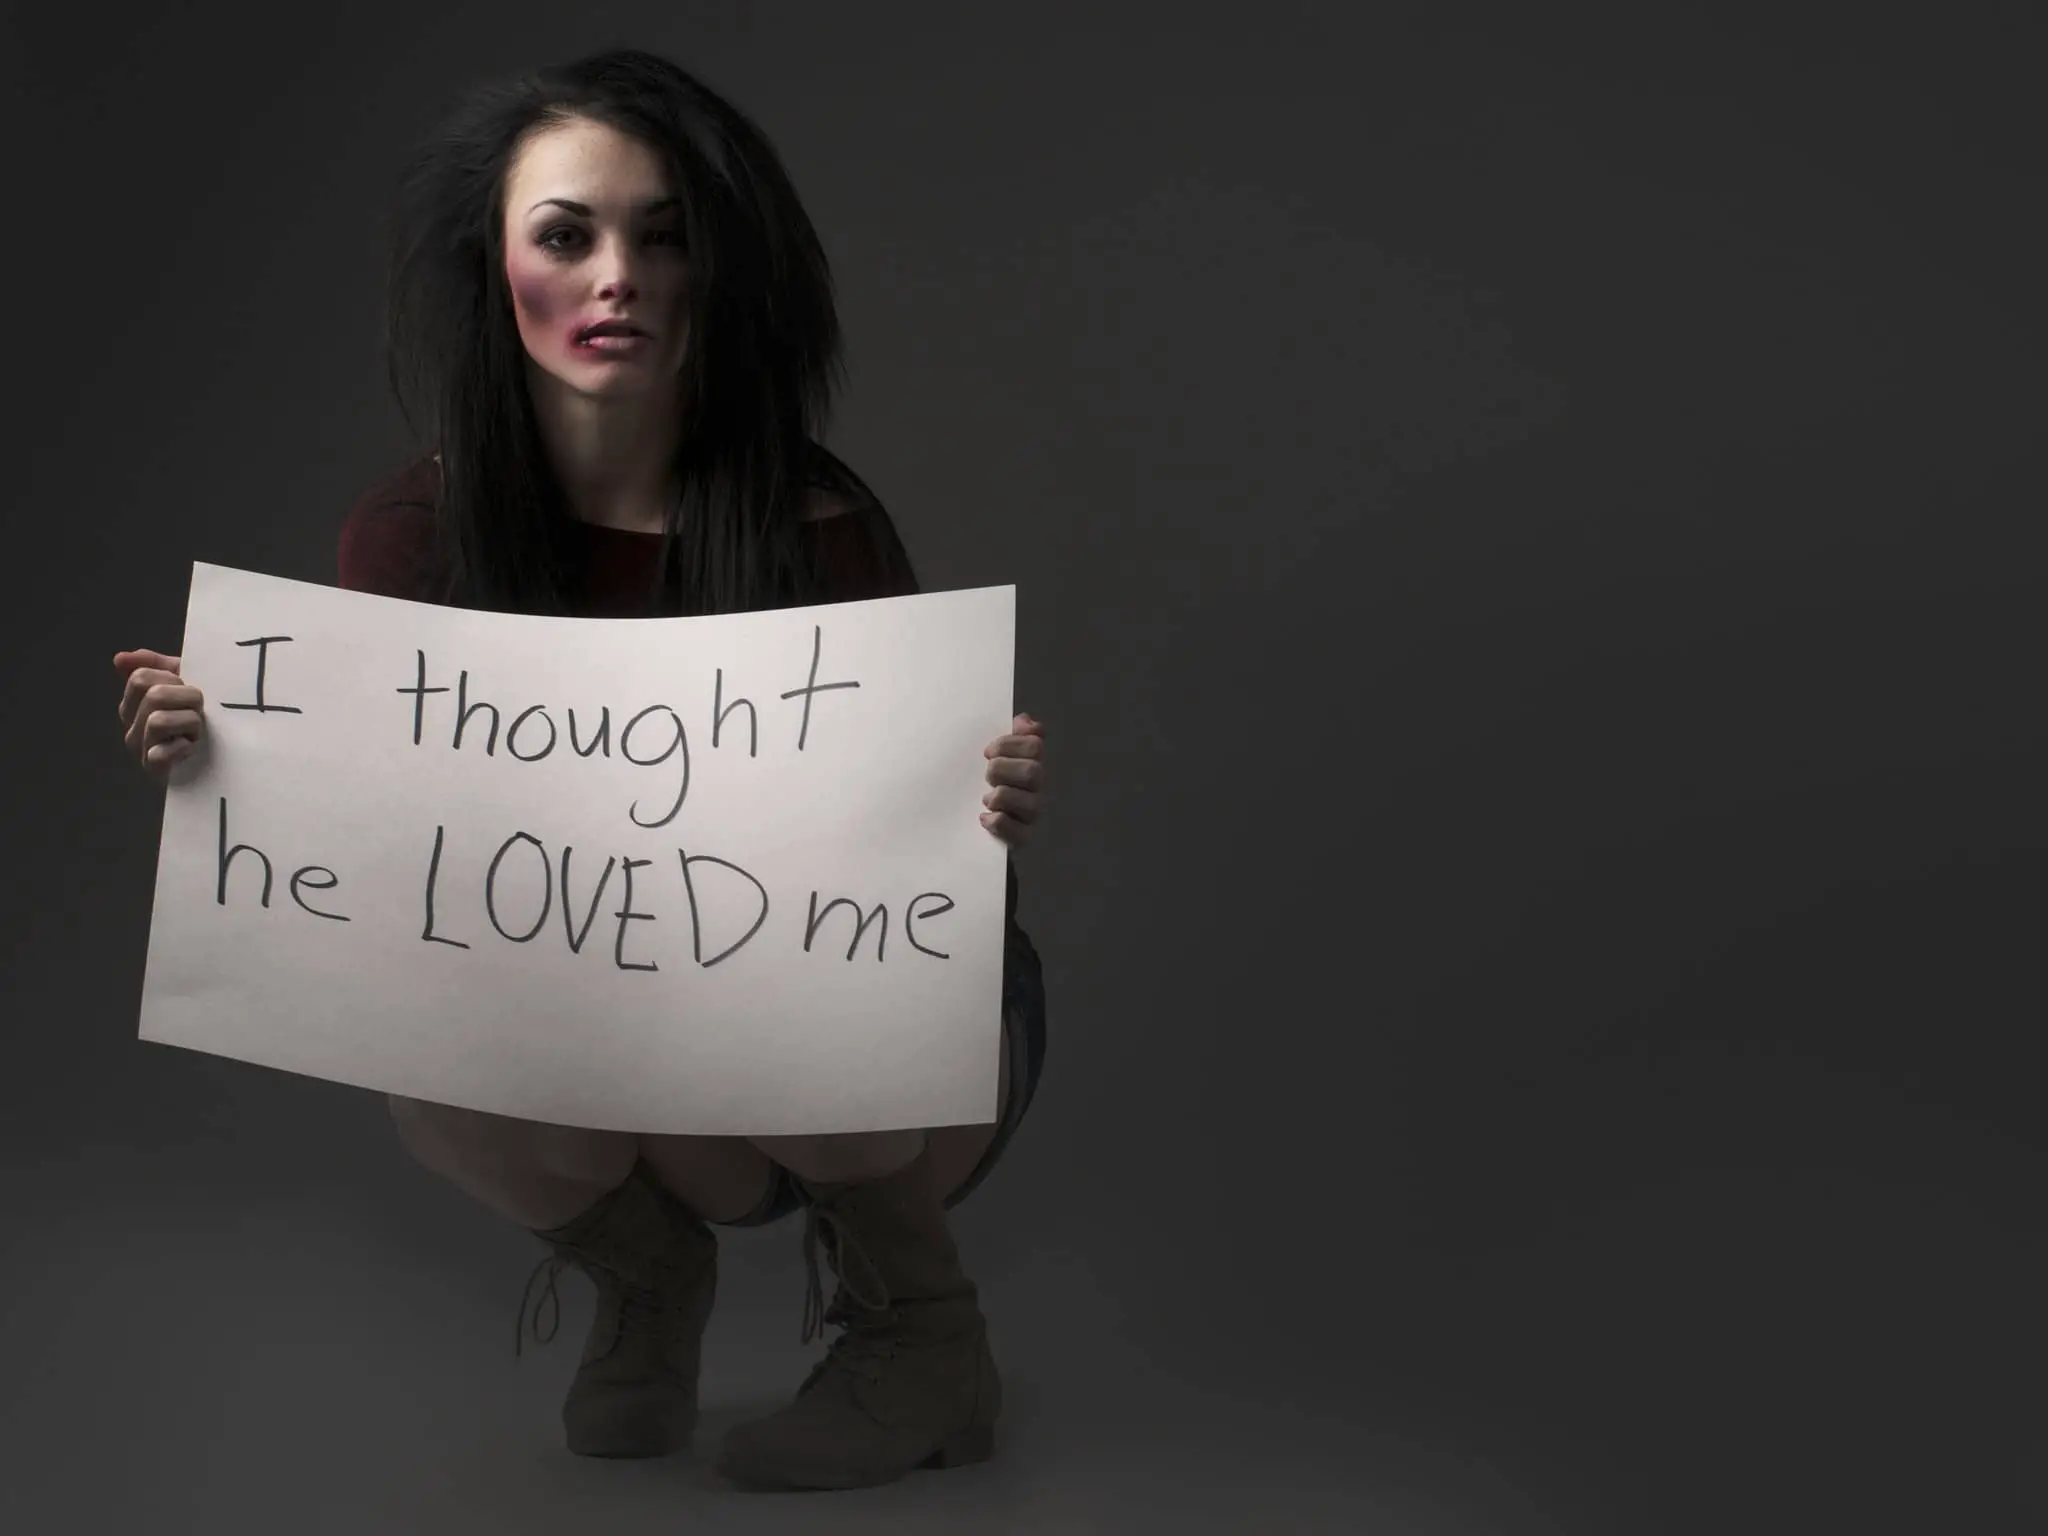 Woman kneeling down and holding a sign that says I thought he loved me